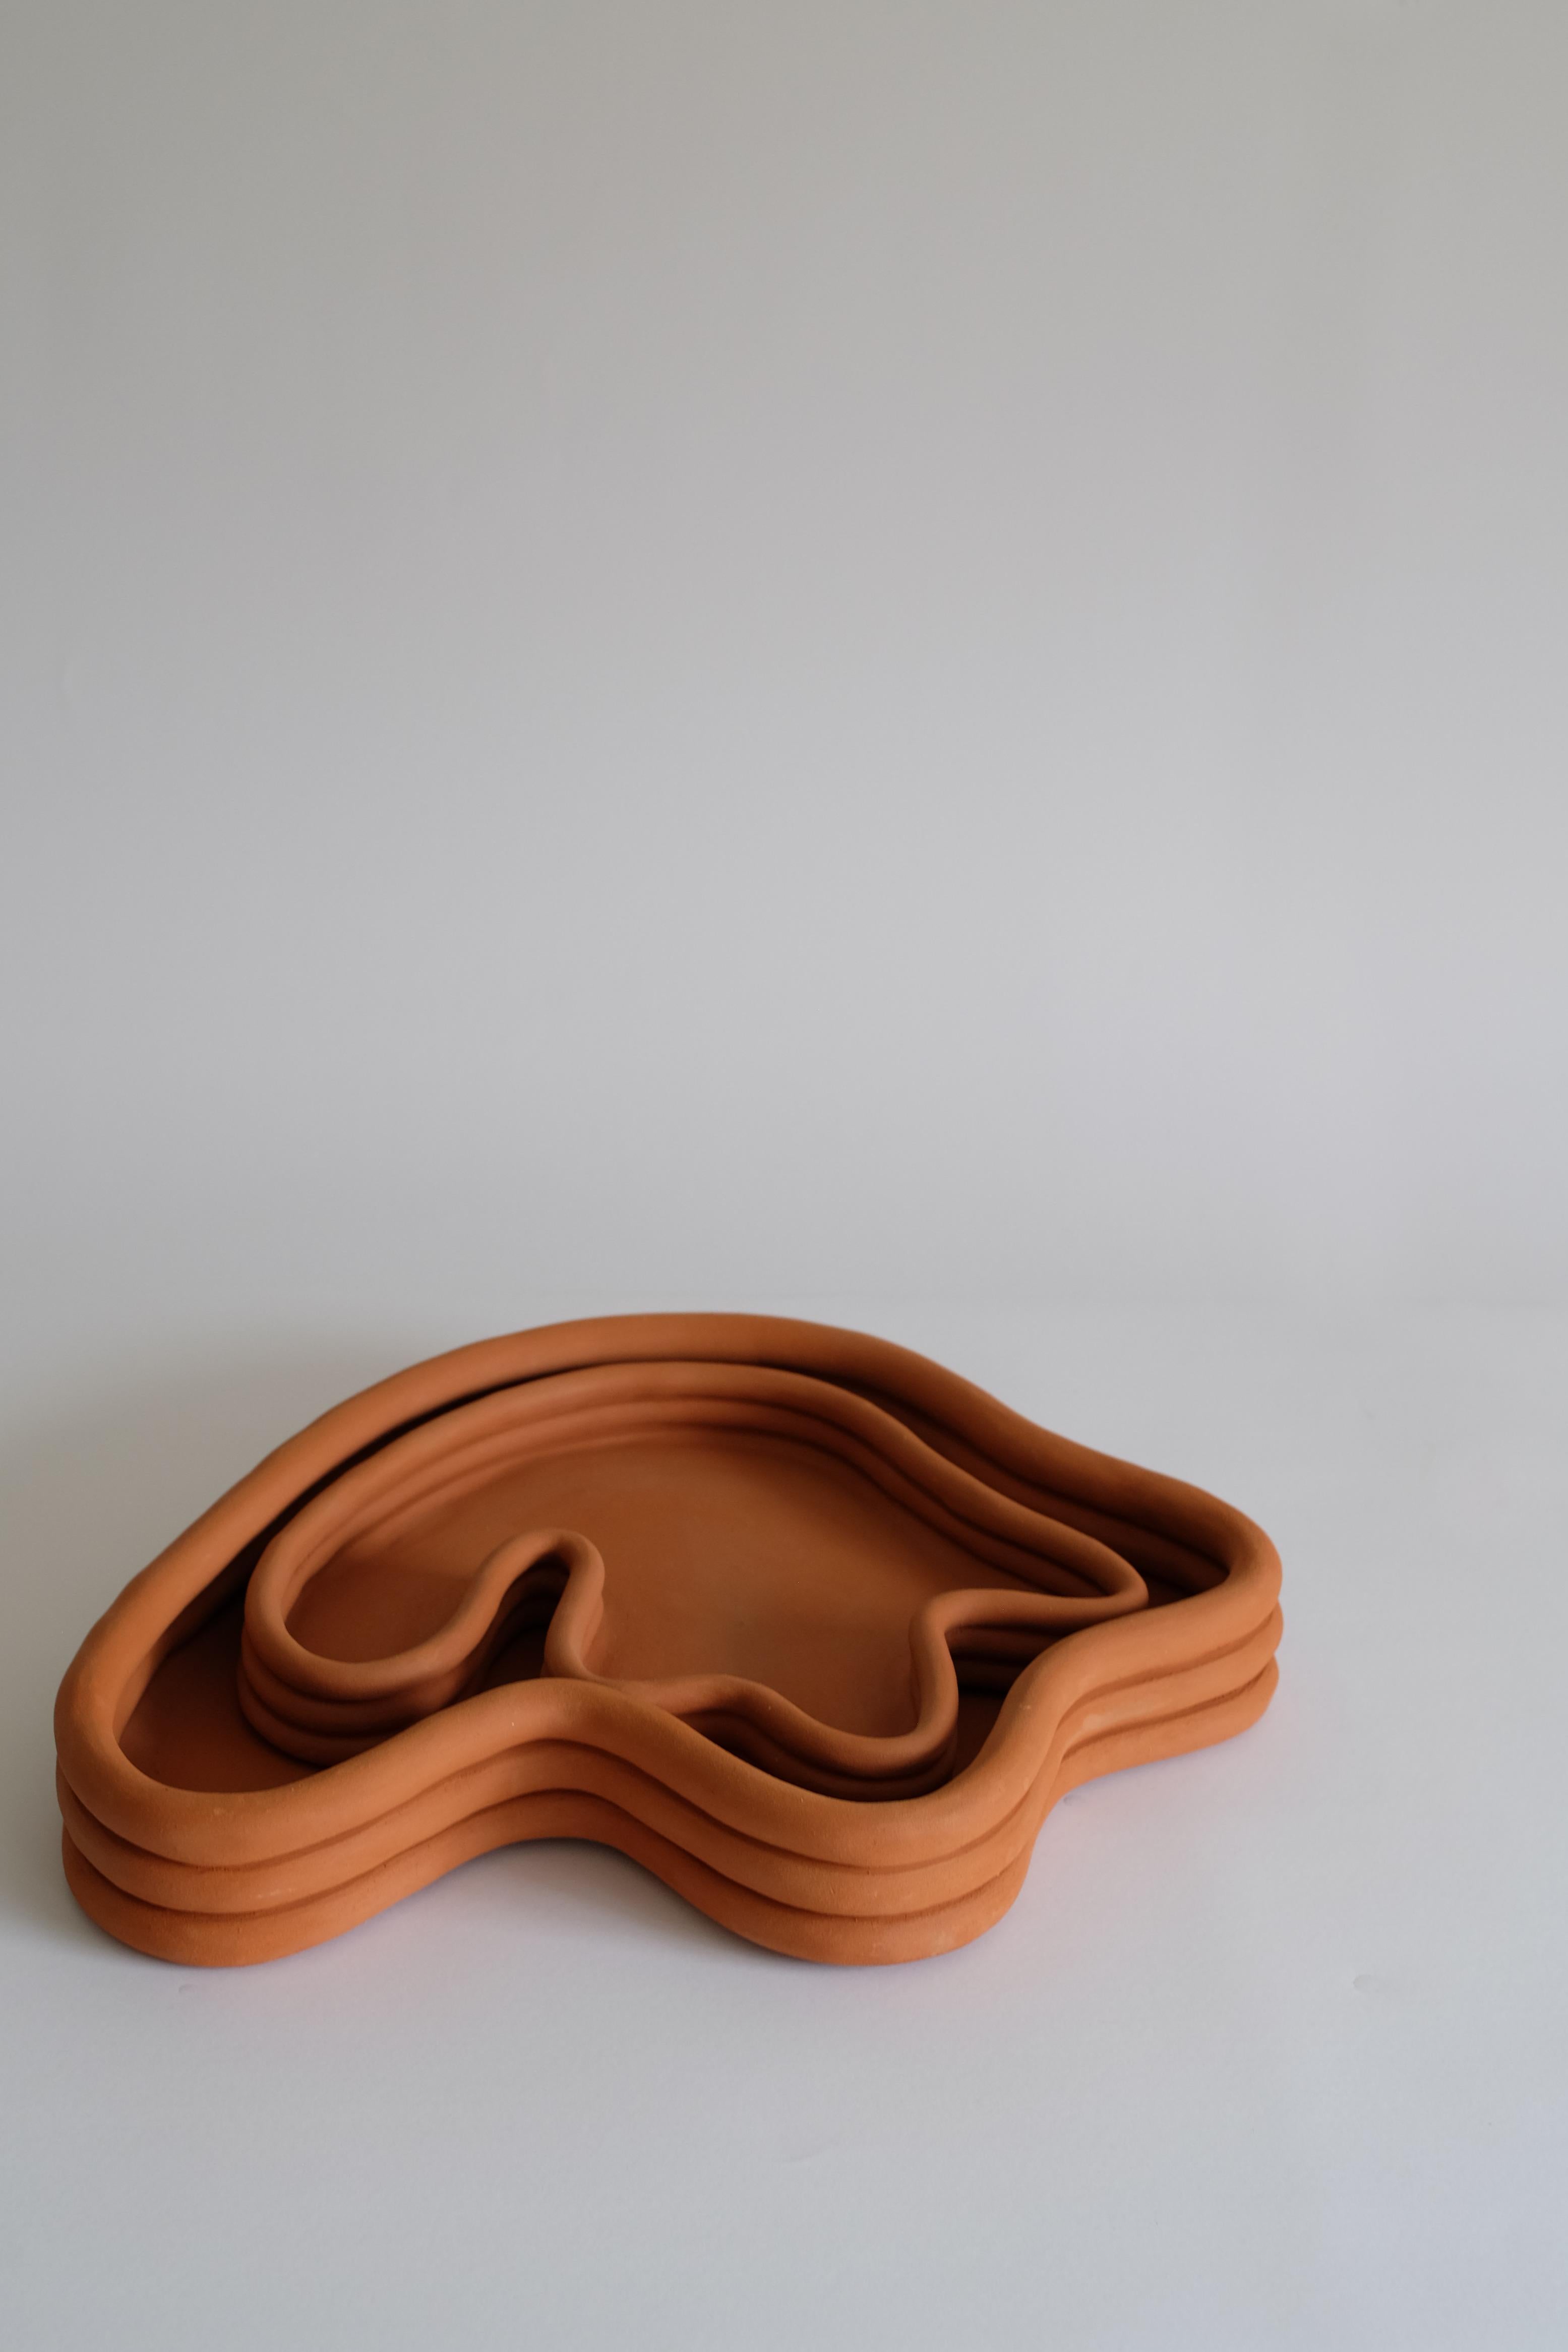 Set of 2 Raw Terracotta Mother and son table Centerpieces by Sophie Parachey
Dimensions Big: W 37 x D 32 x H 8 cm
Dimensions Small: W 28 x D 24 x H 3.5 cm
Materials: White stoneware, cream velvet glaze.
Handpicked in Guatemala.

Inspired by